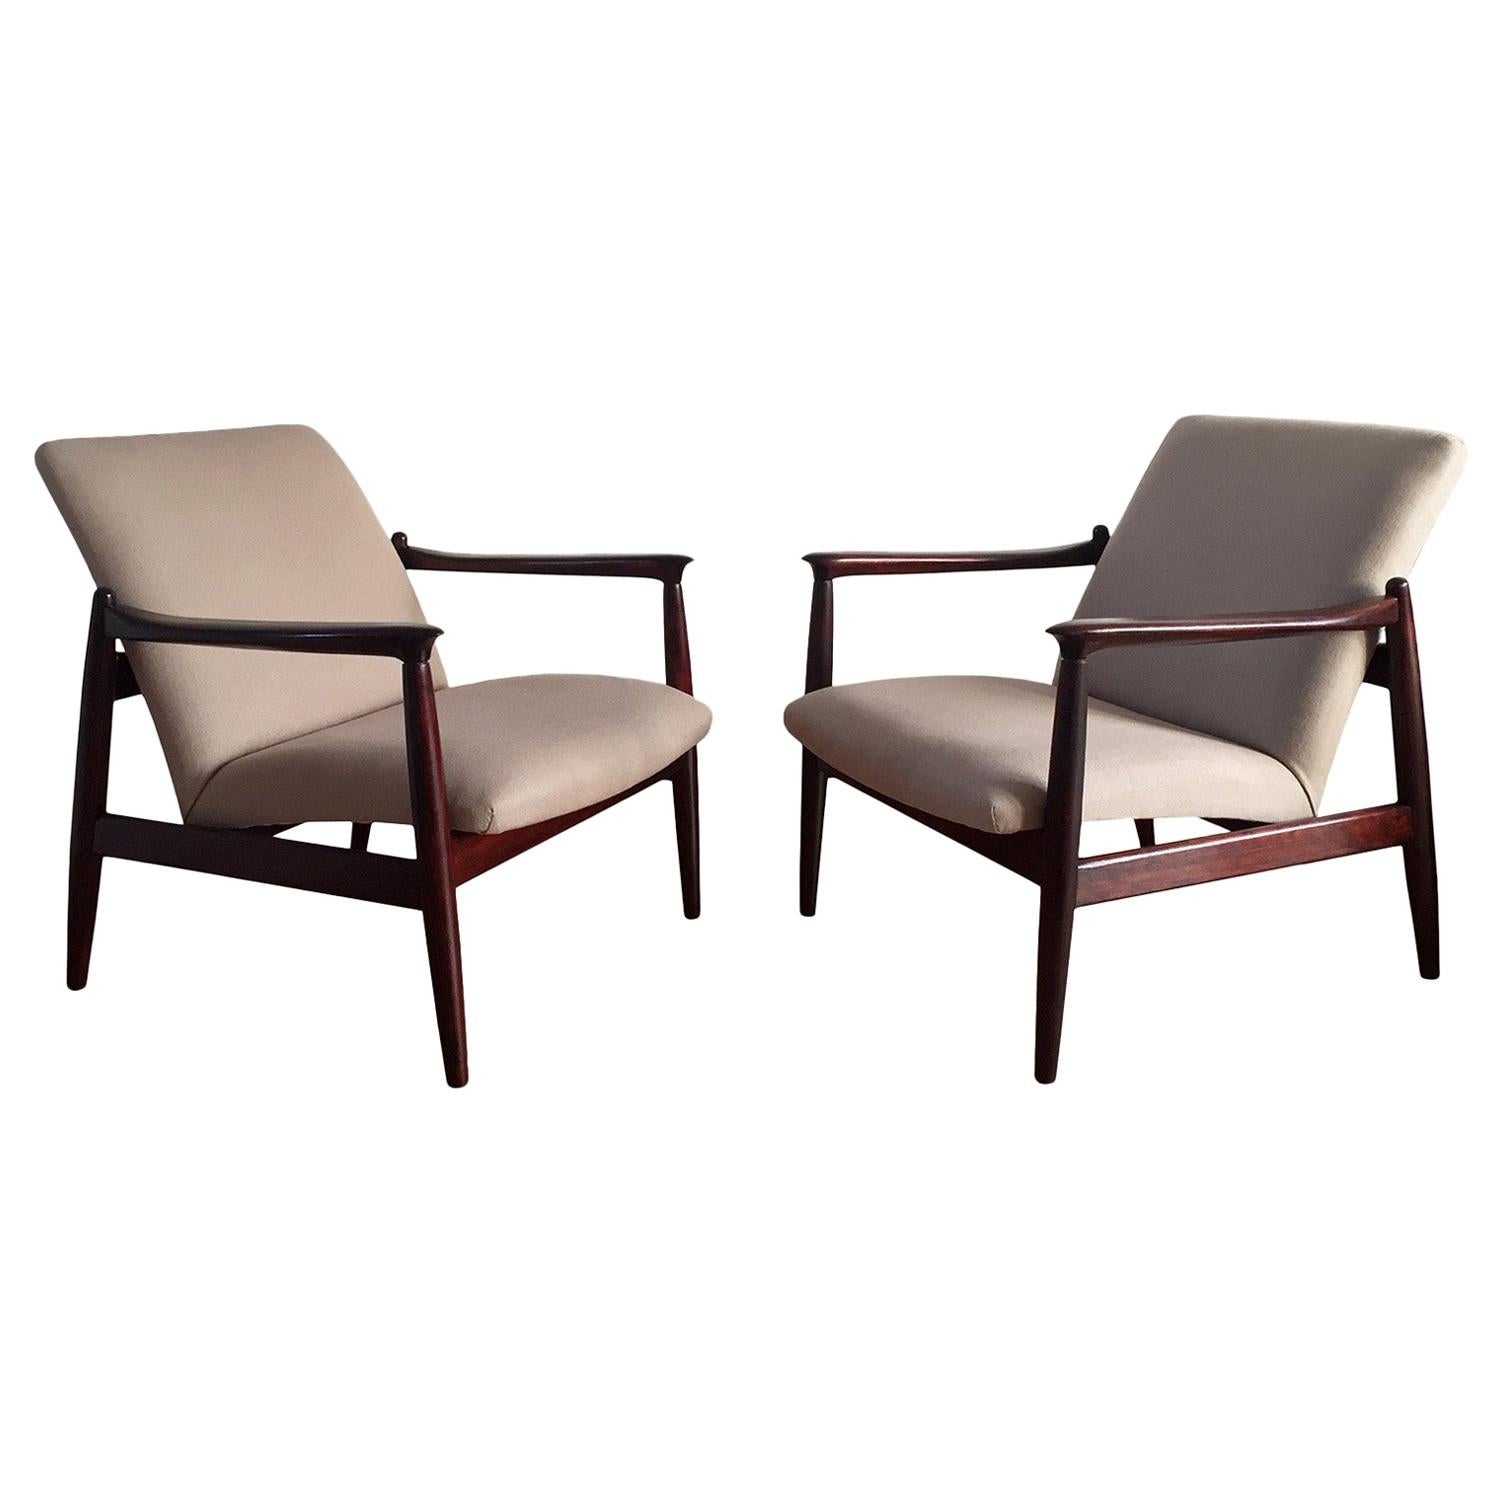 Pair of Armchairs, Beige Linen, Edmund Homa, 1960s For Sale